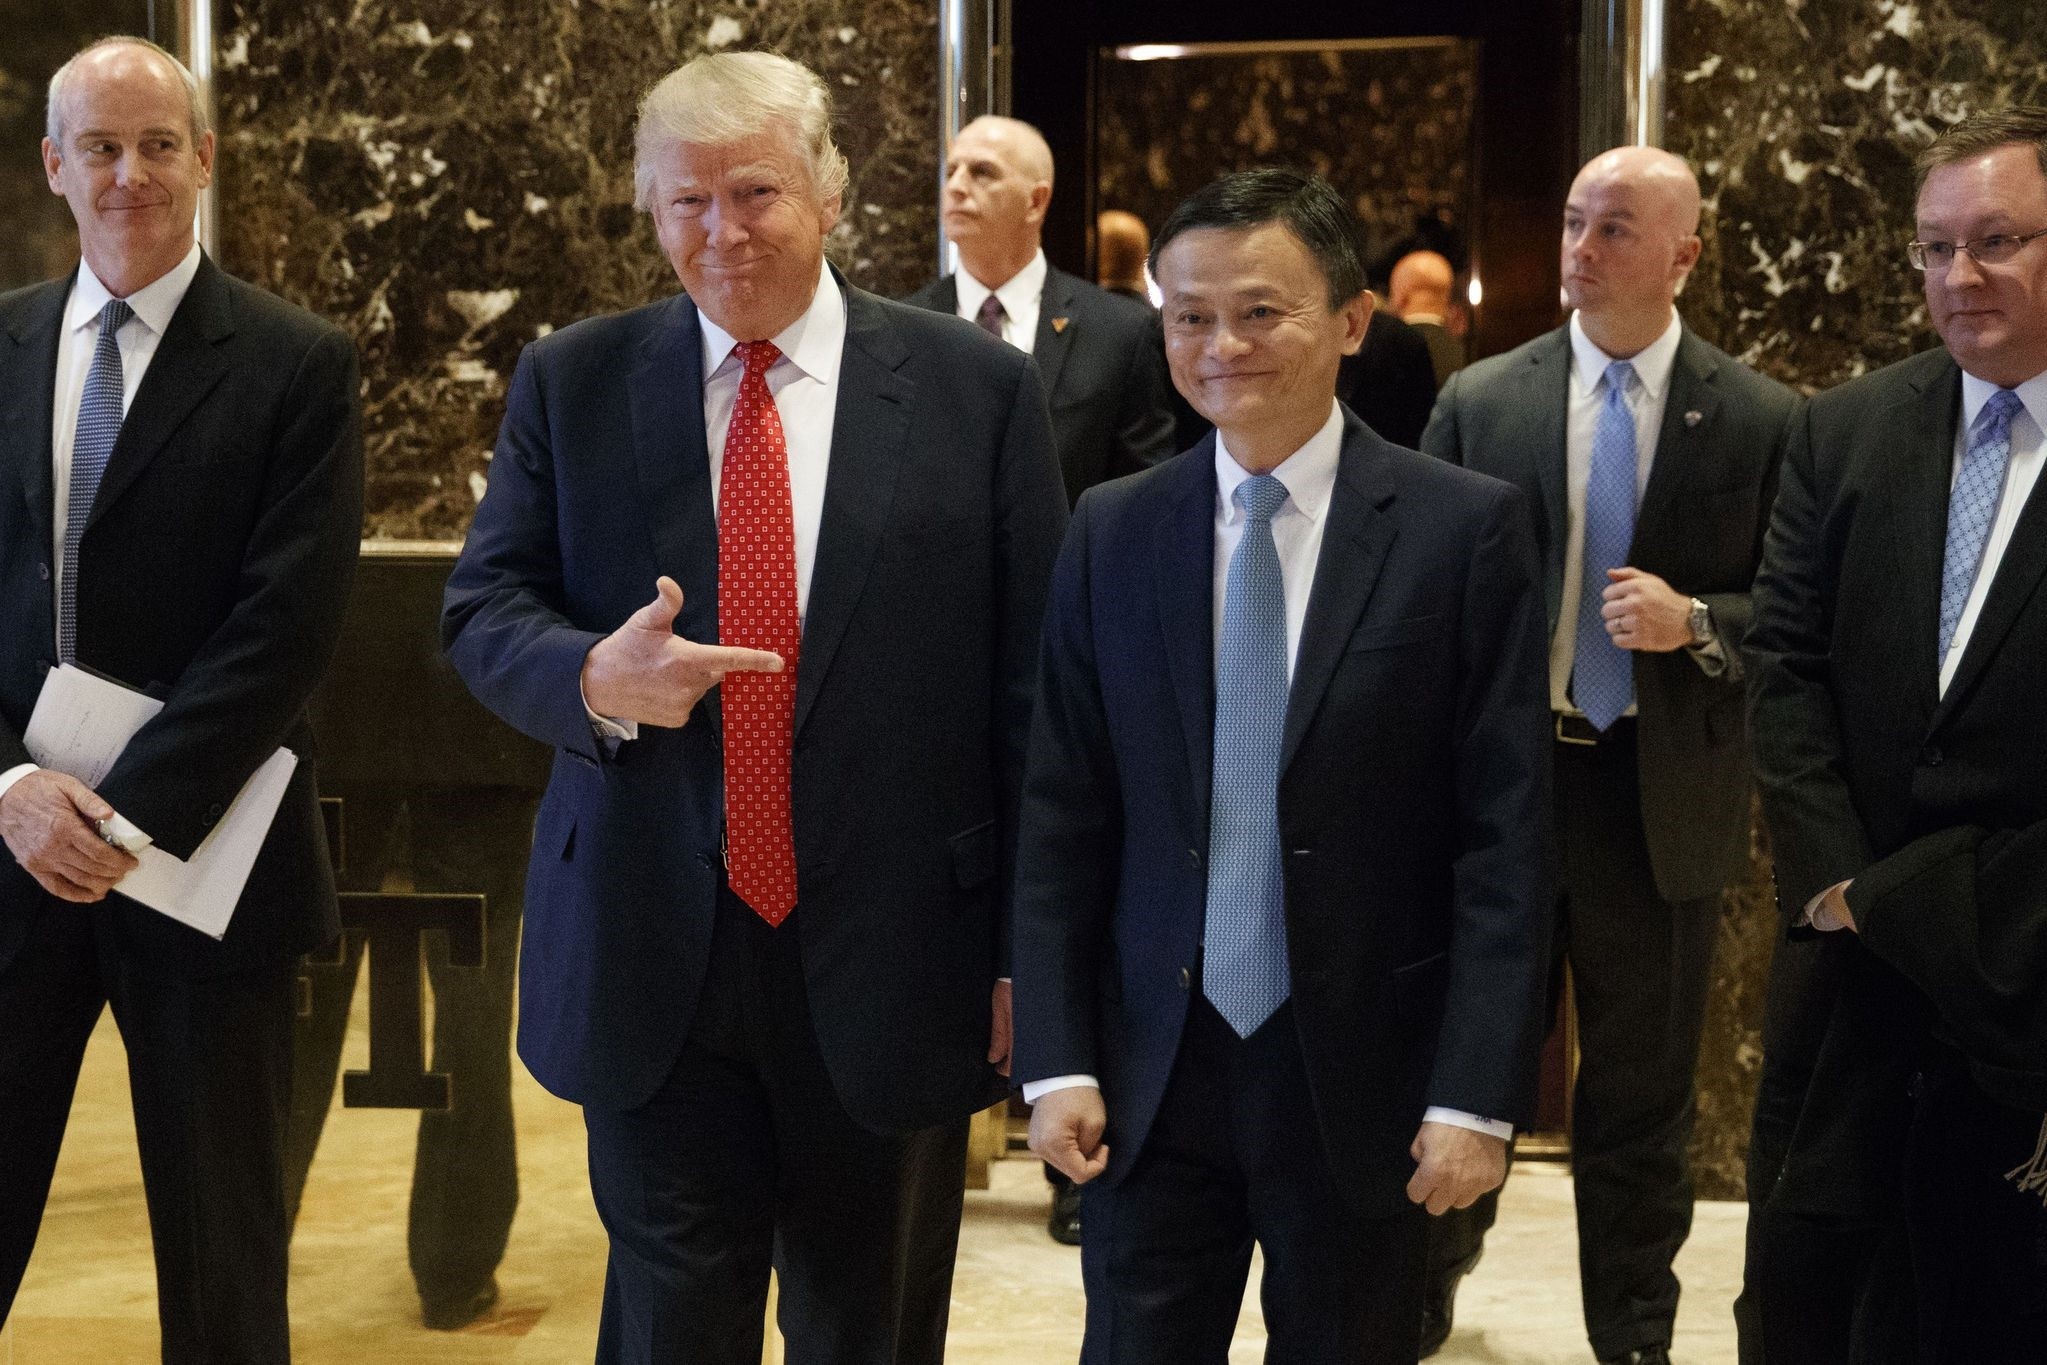 Jack Ma (R), founder and executive chairman of Alibaba Group, and President-elect Donald Trump speak to the media after their meeting at Trump Tower in New York.